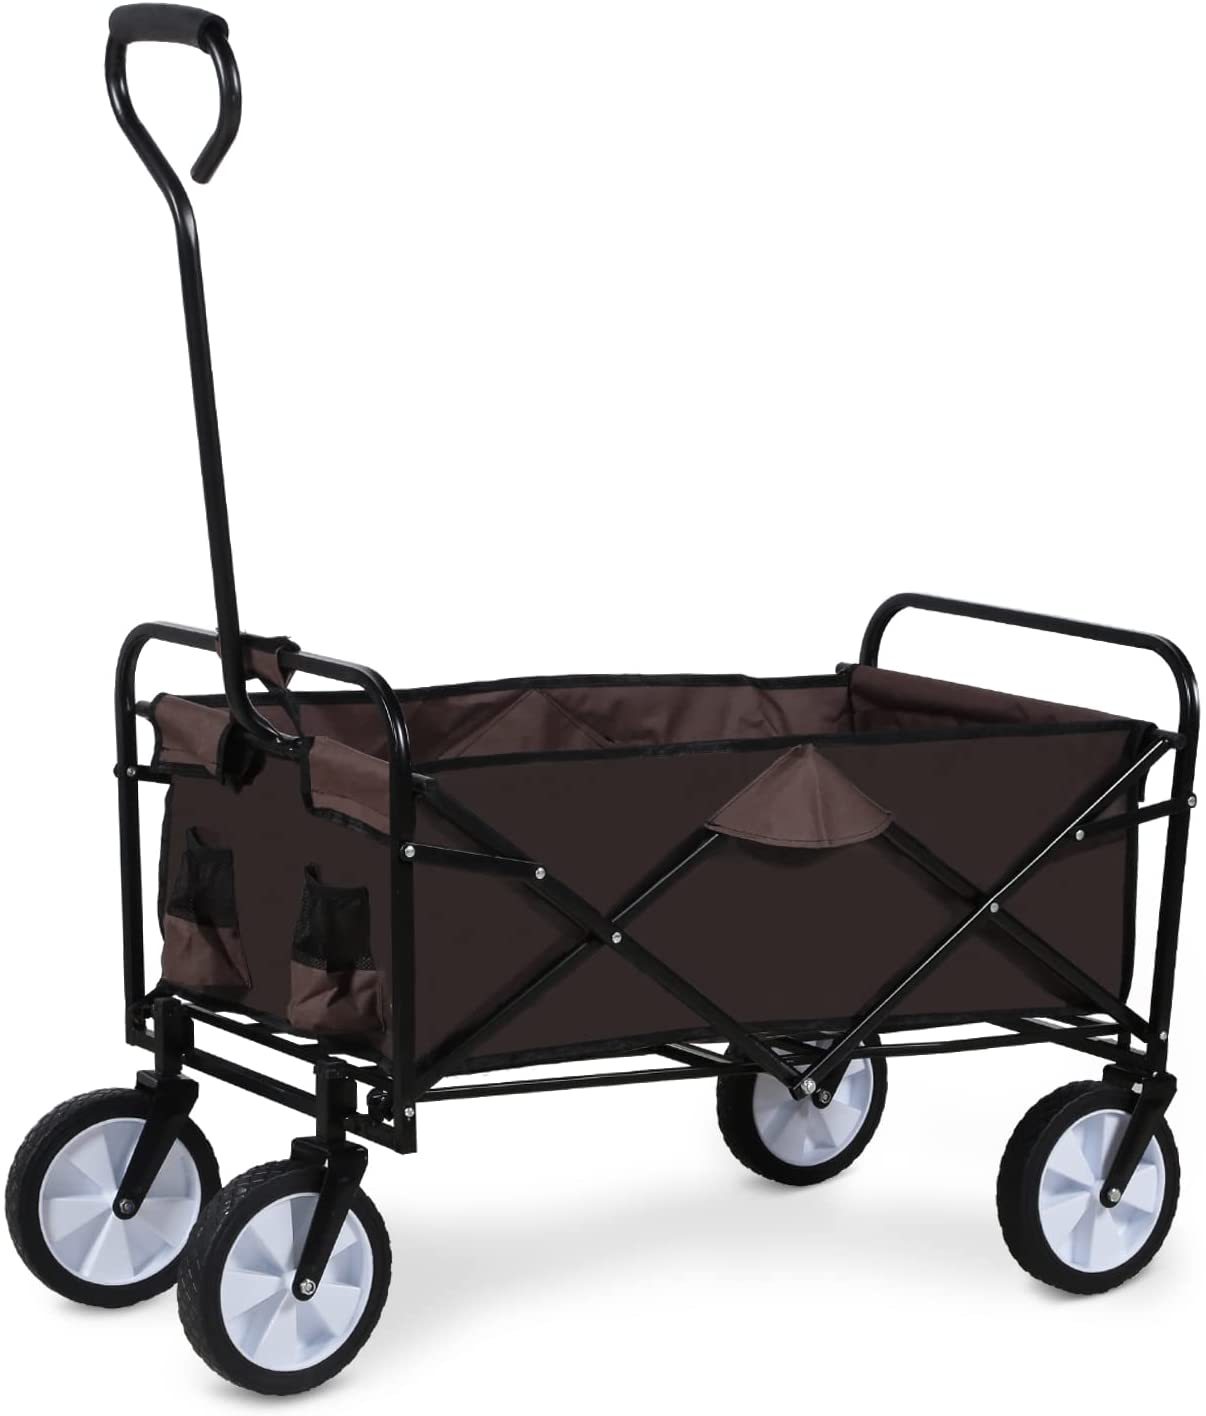 YSSOA Rolling Collapsible Garden Cart Camping Wagon brown-steel